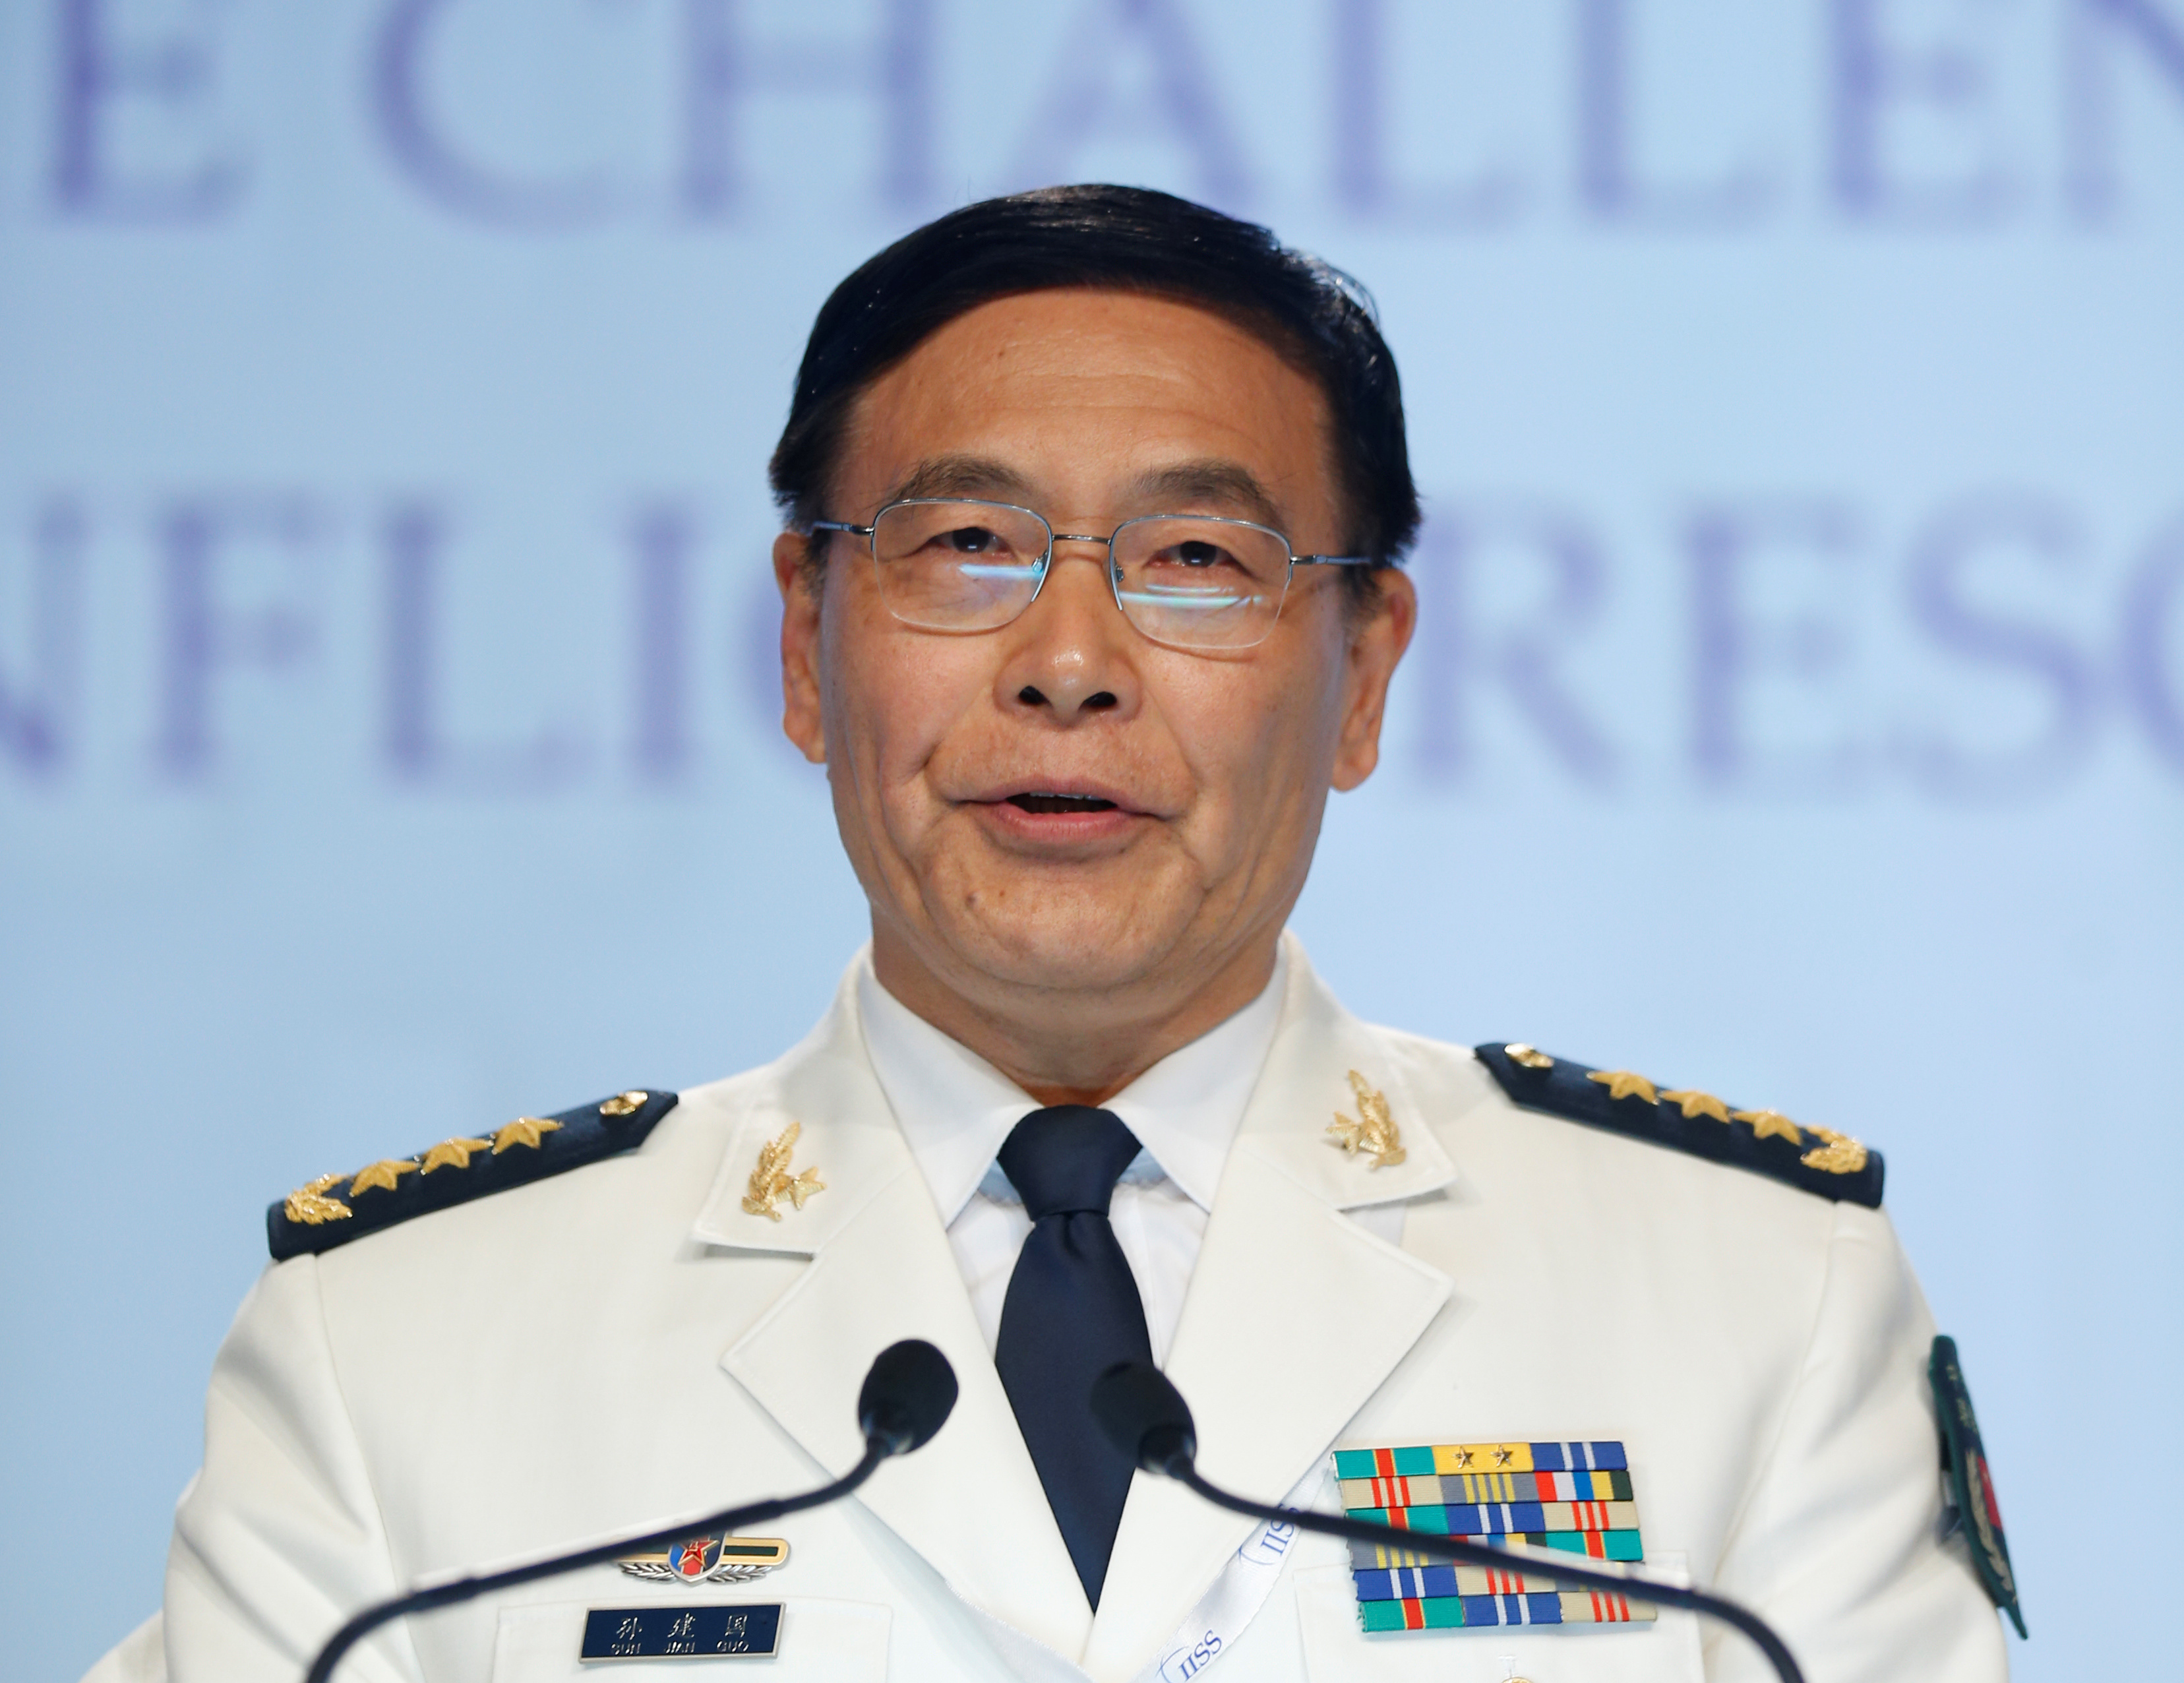 China's Joint Staff Department Deputy Chief Admiral Sun Jianguo speaks at the IISS Shangri-La Dialogue in Singapore